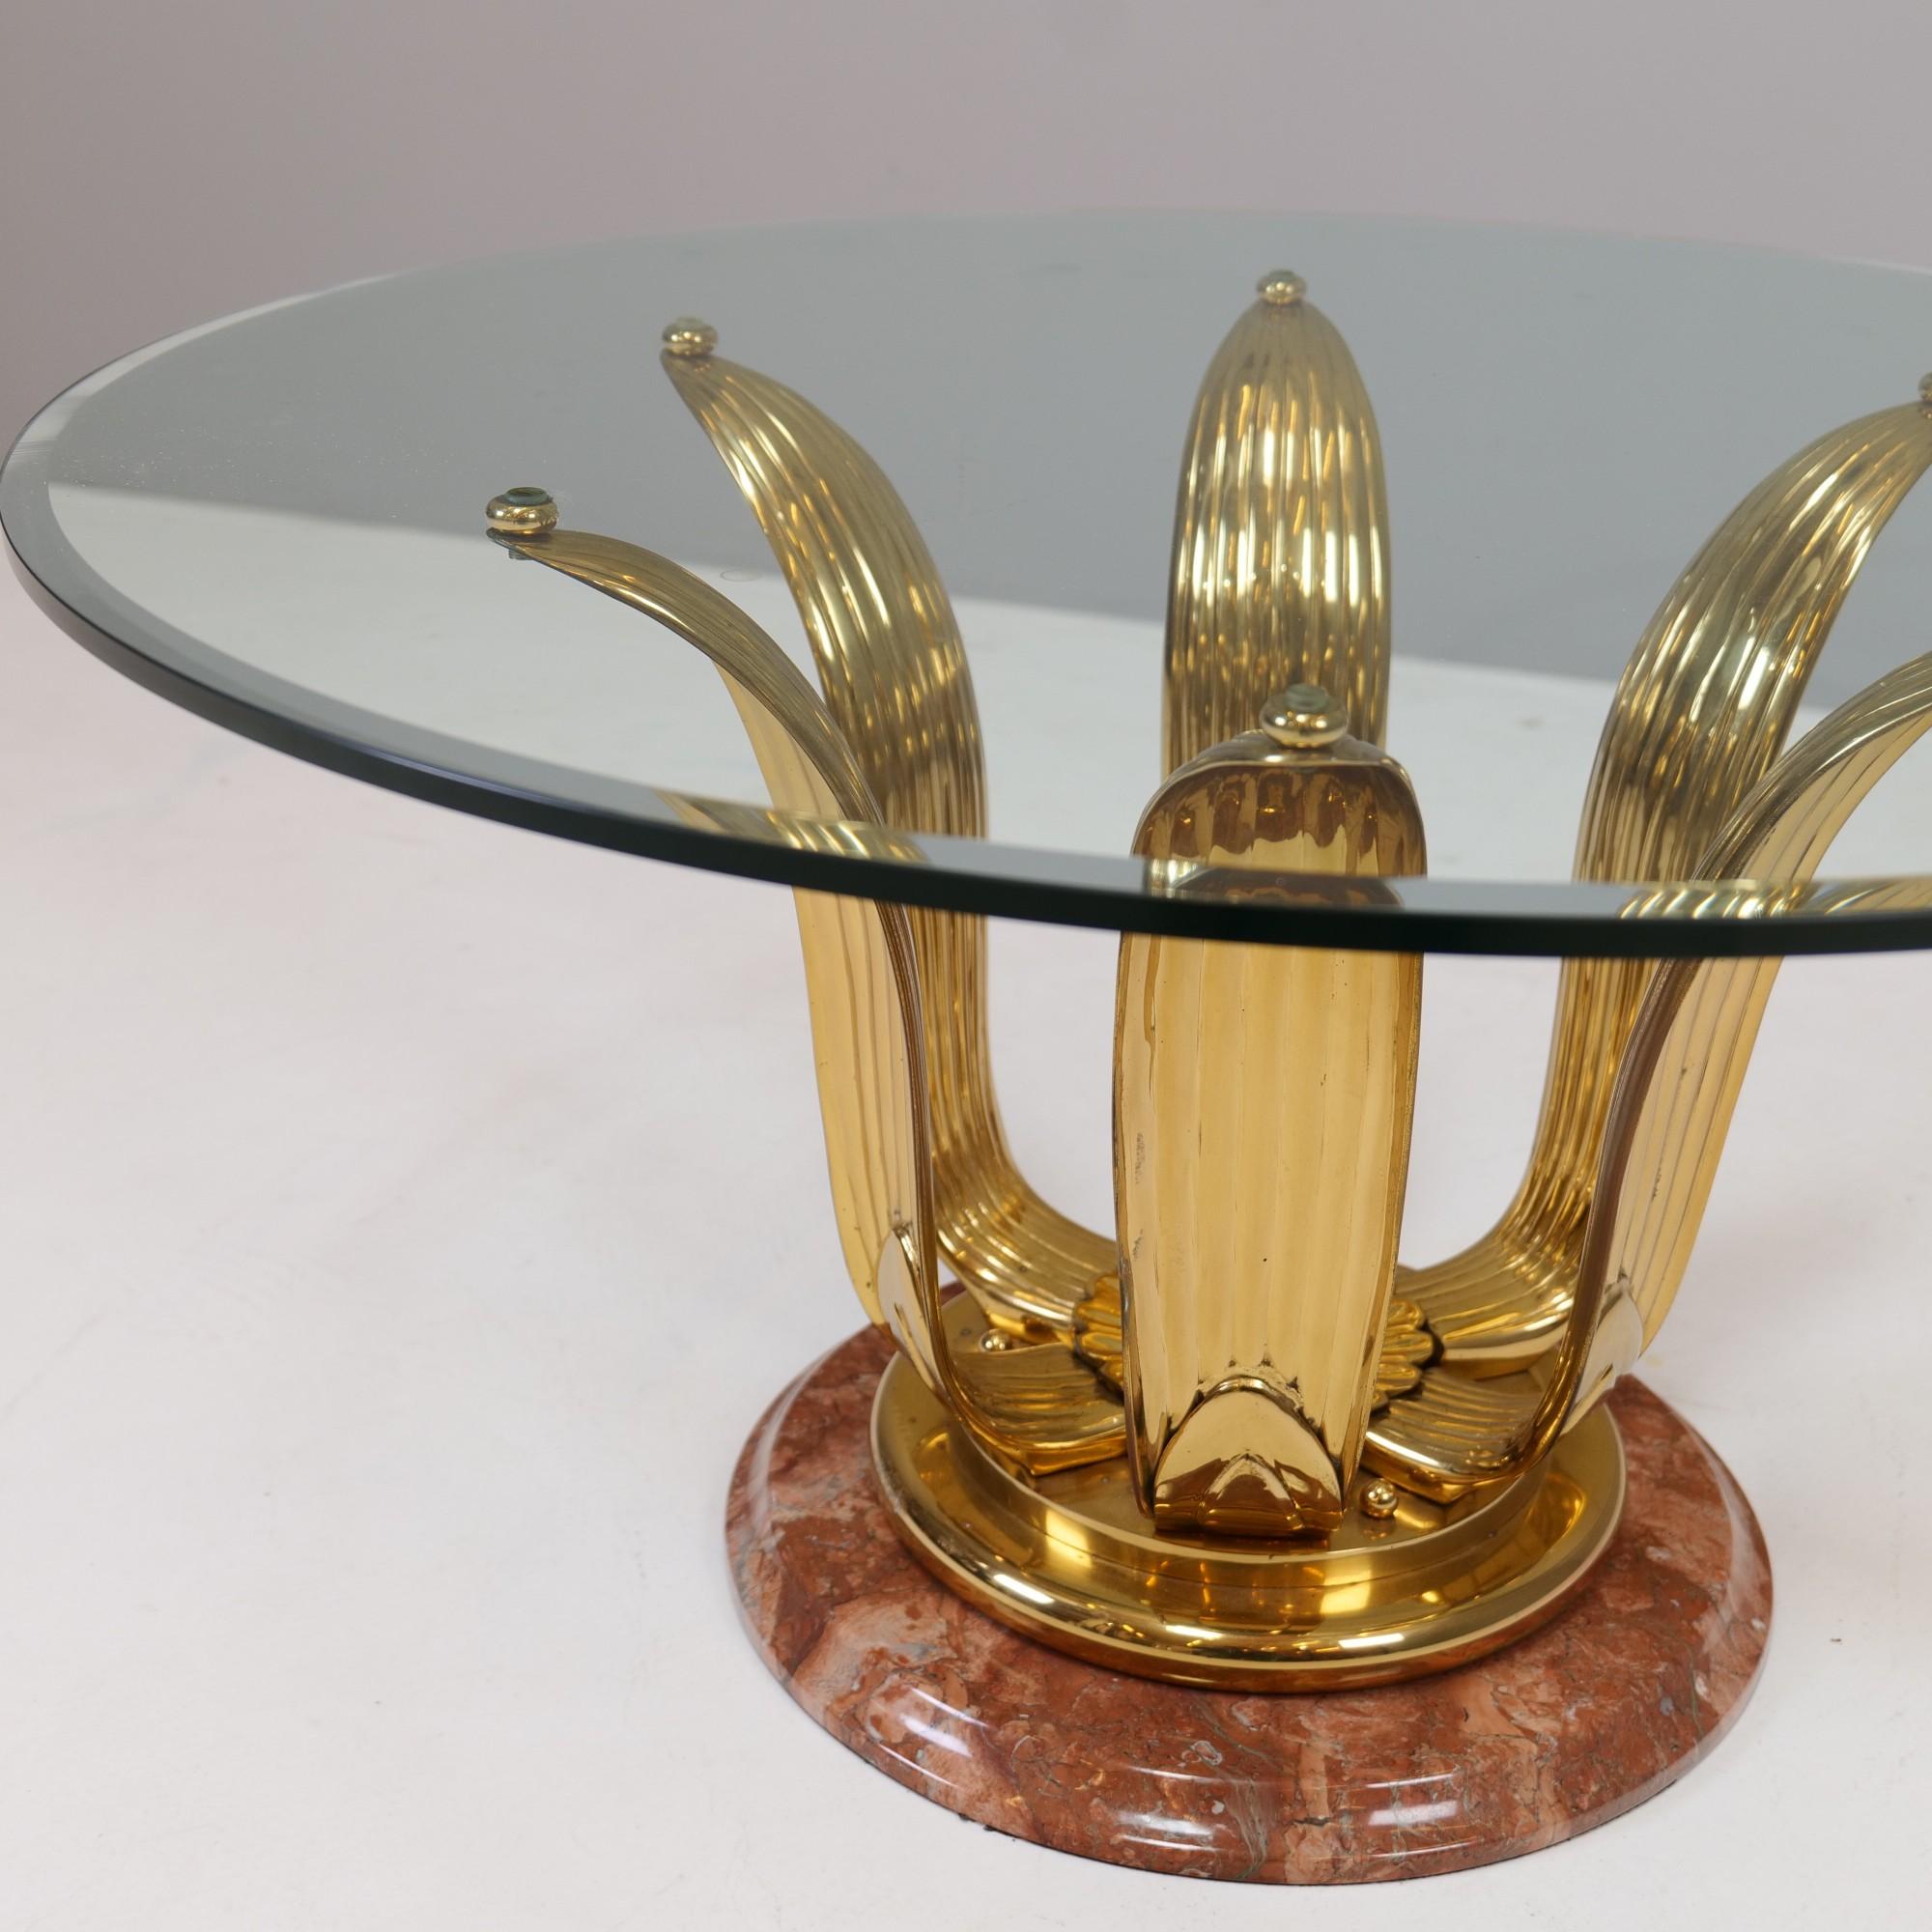 Faceted Vintage Regency Hollywood Coffee Table in Art Deco Style